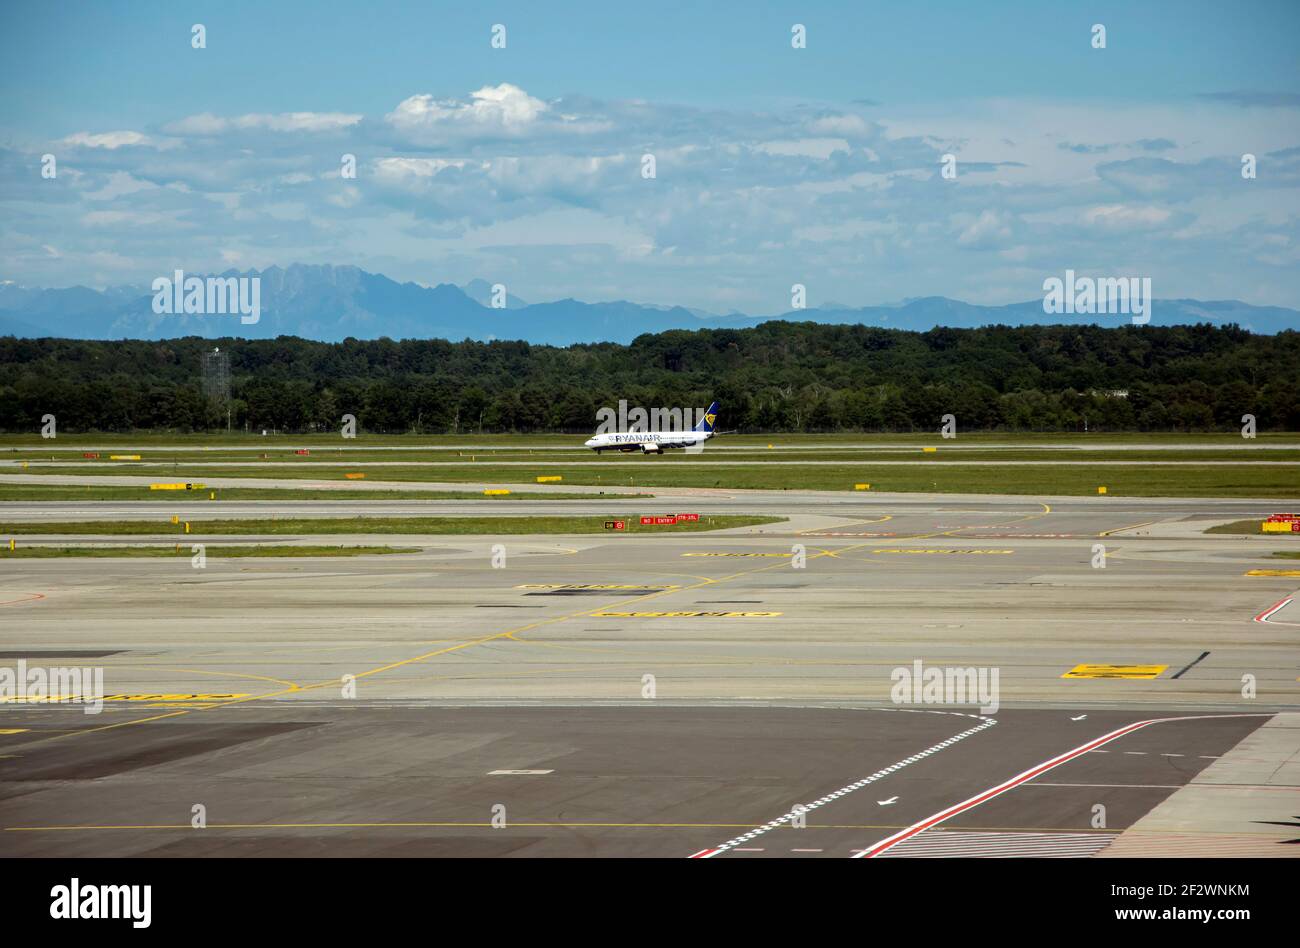 Malpensa Terminal 1 High Resolution Stock Photography and Images - Alamy